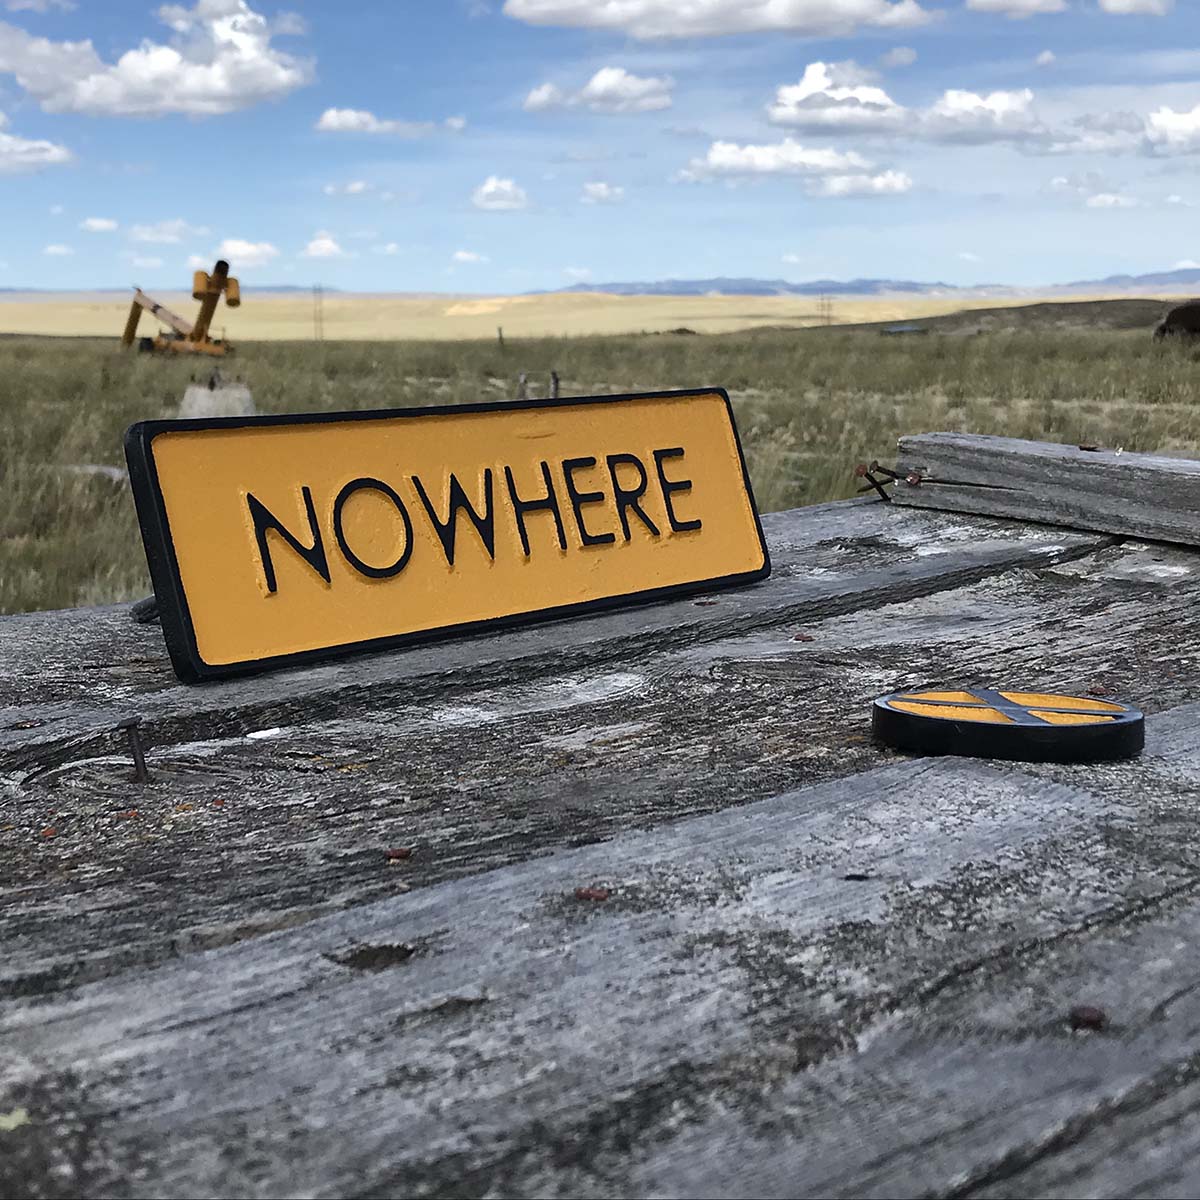 An art installation featuring a black-and-yellow sign that reads "NOWHERE."